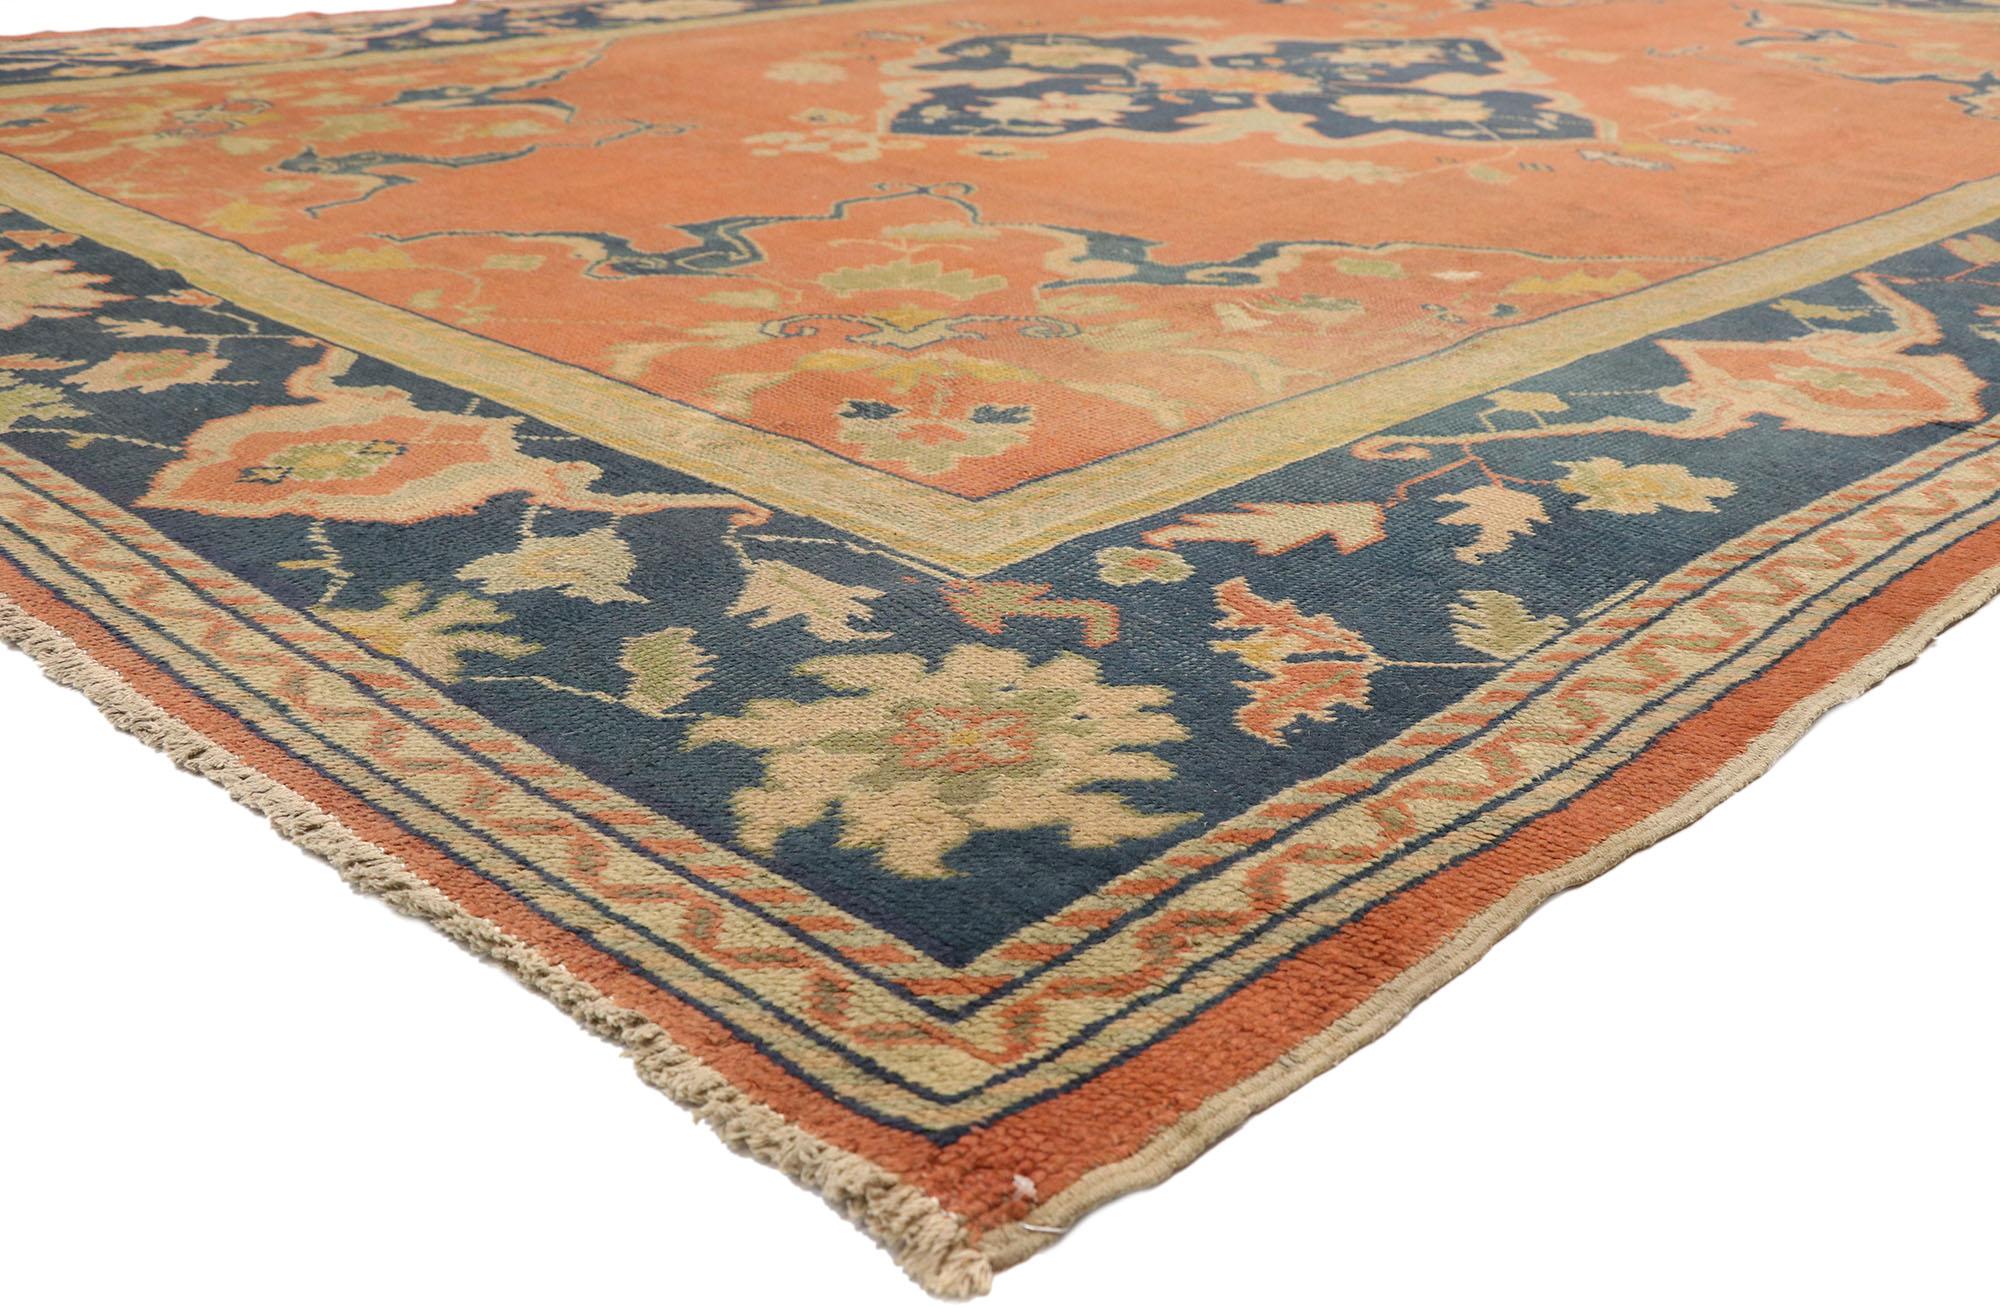 72469 Antique Turkish Oushak Rug, 10'02 x 13'10. 
Timeless appeal meets Mediterranean Chic in this hand knotted wool antique Turkish Oushak rug. The intricate botanical design and subtly bold colors woven into this piece blends tradition with